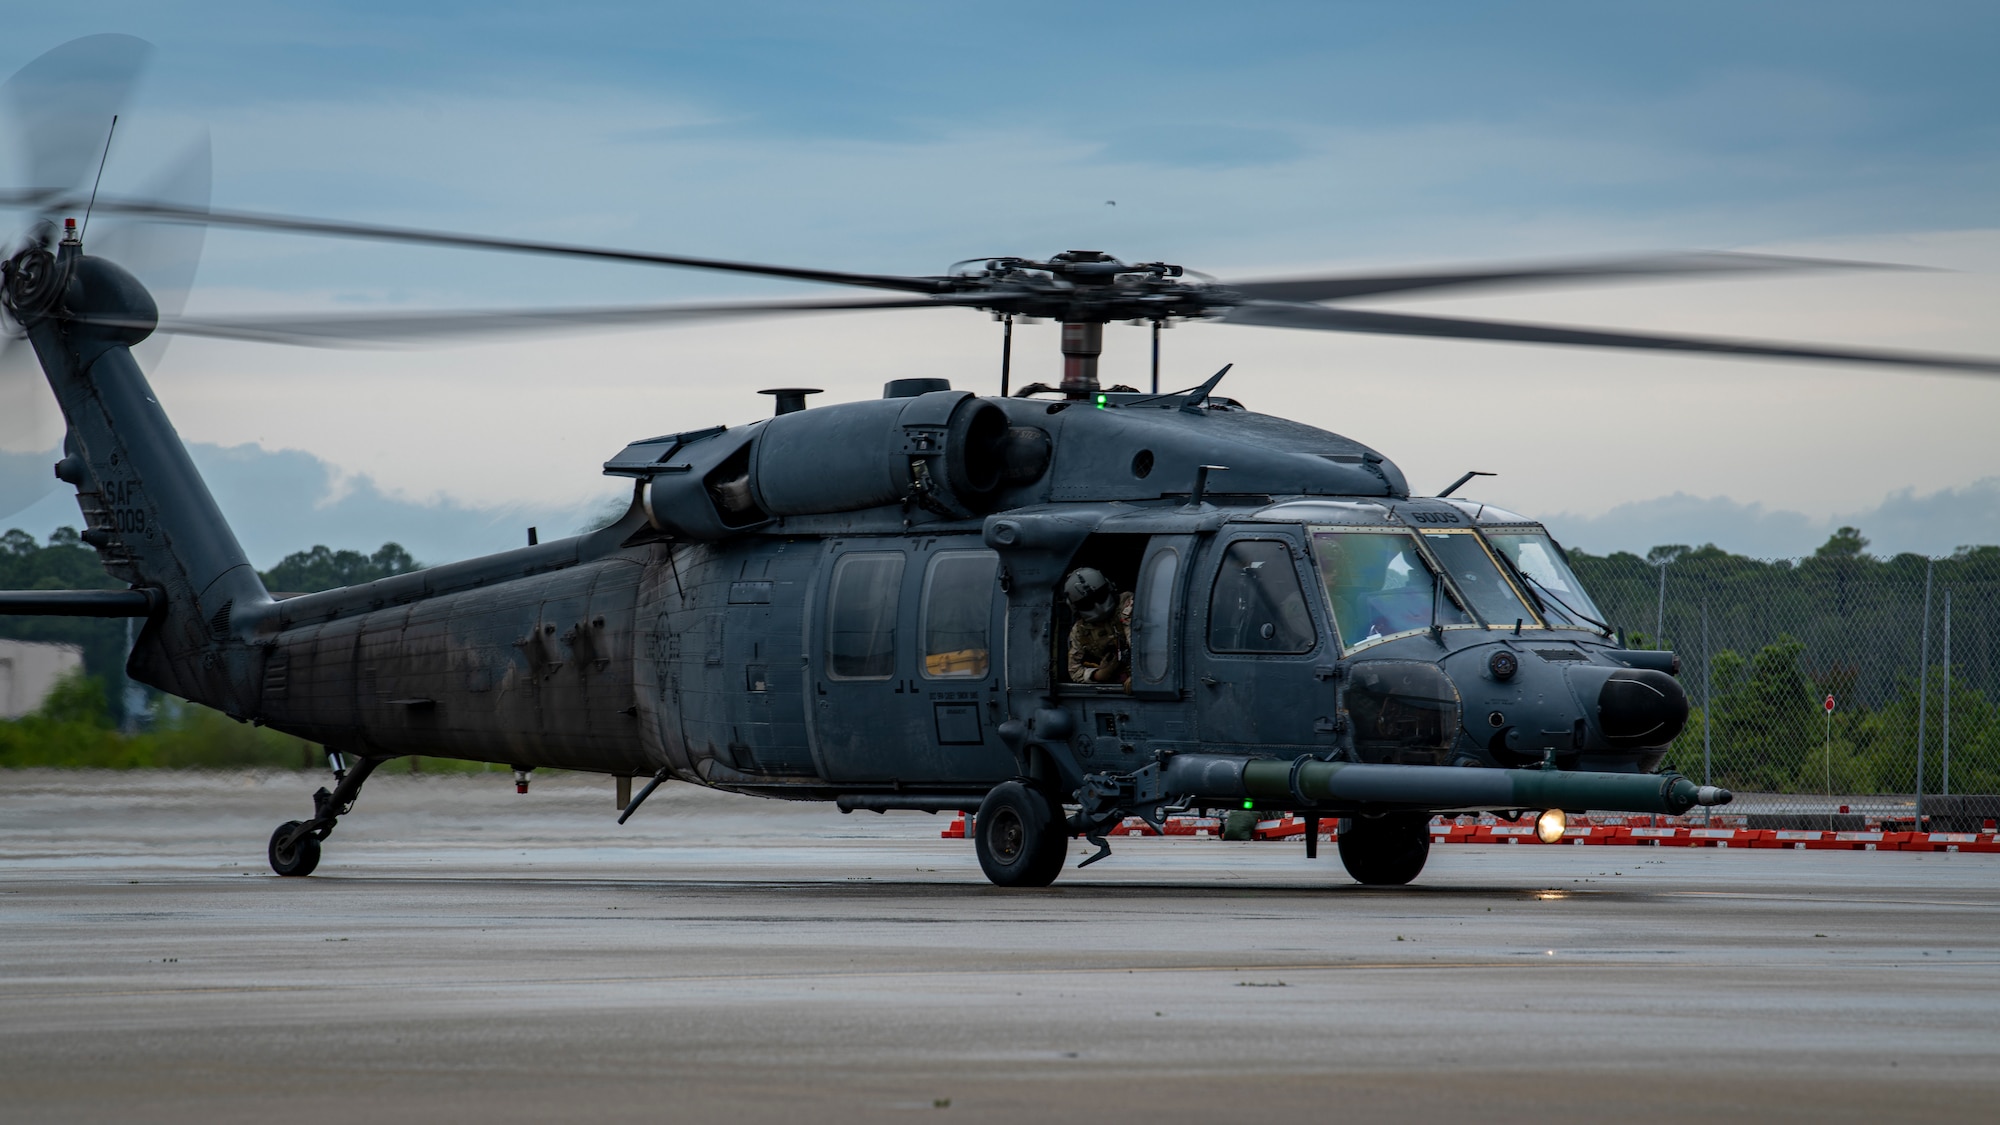 MH-60G Pave Hawk helicopter at t Hurlburt Field, Florida